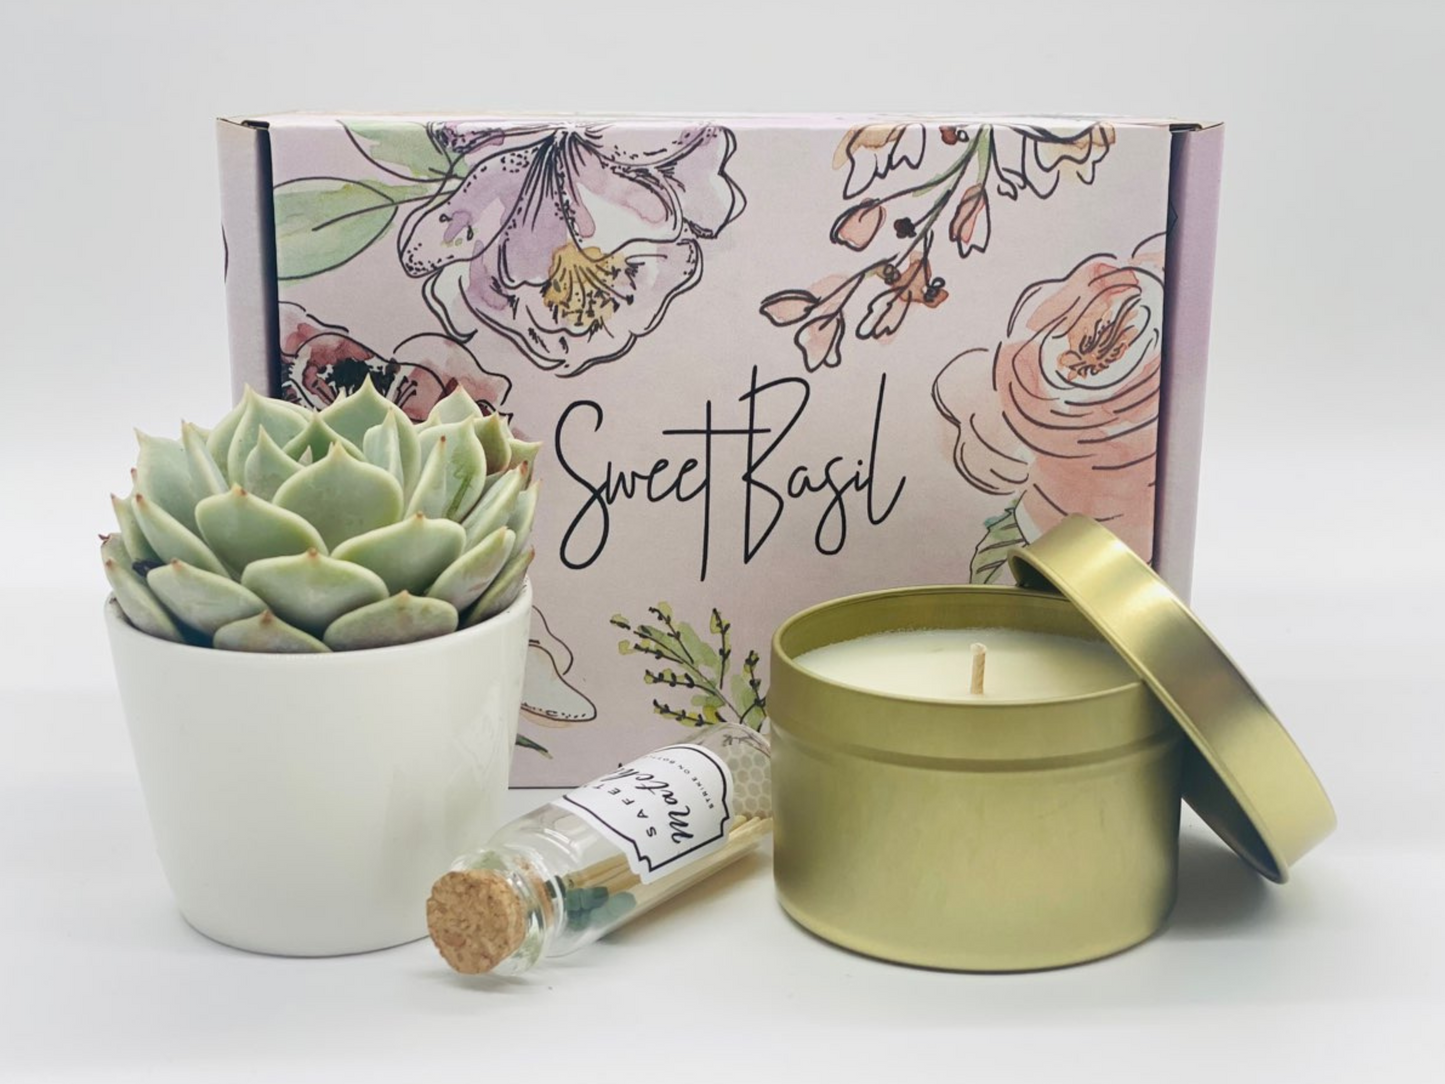 Sending You Love and Hugs Succulent Gift Box